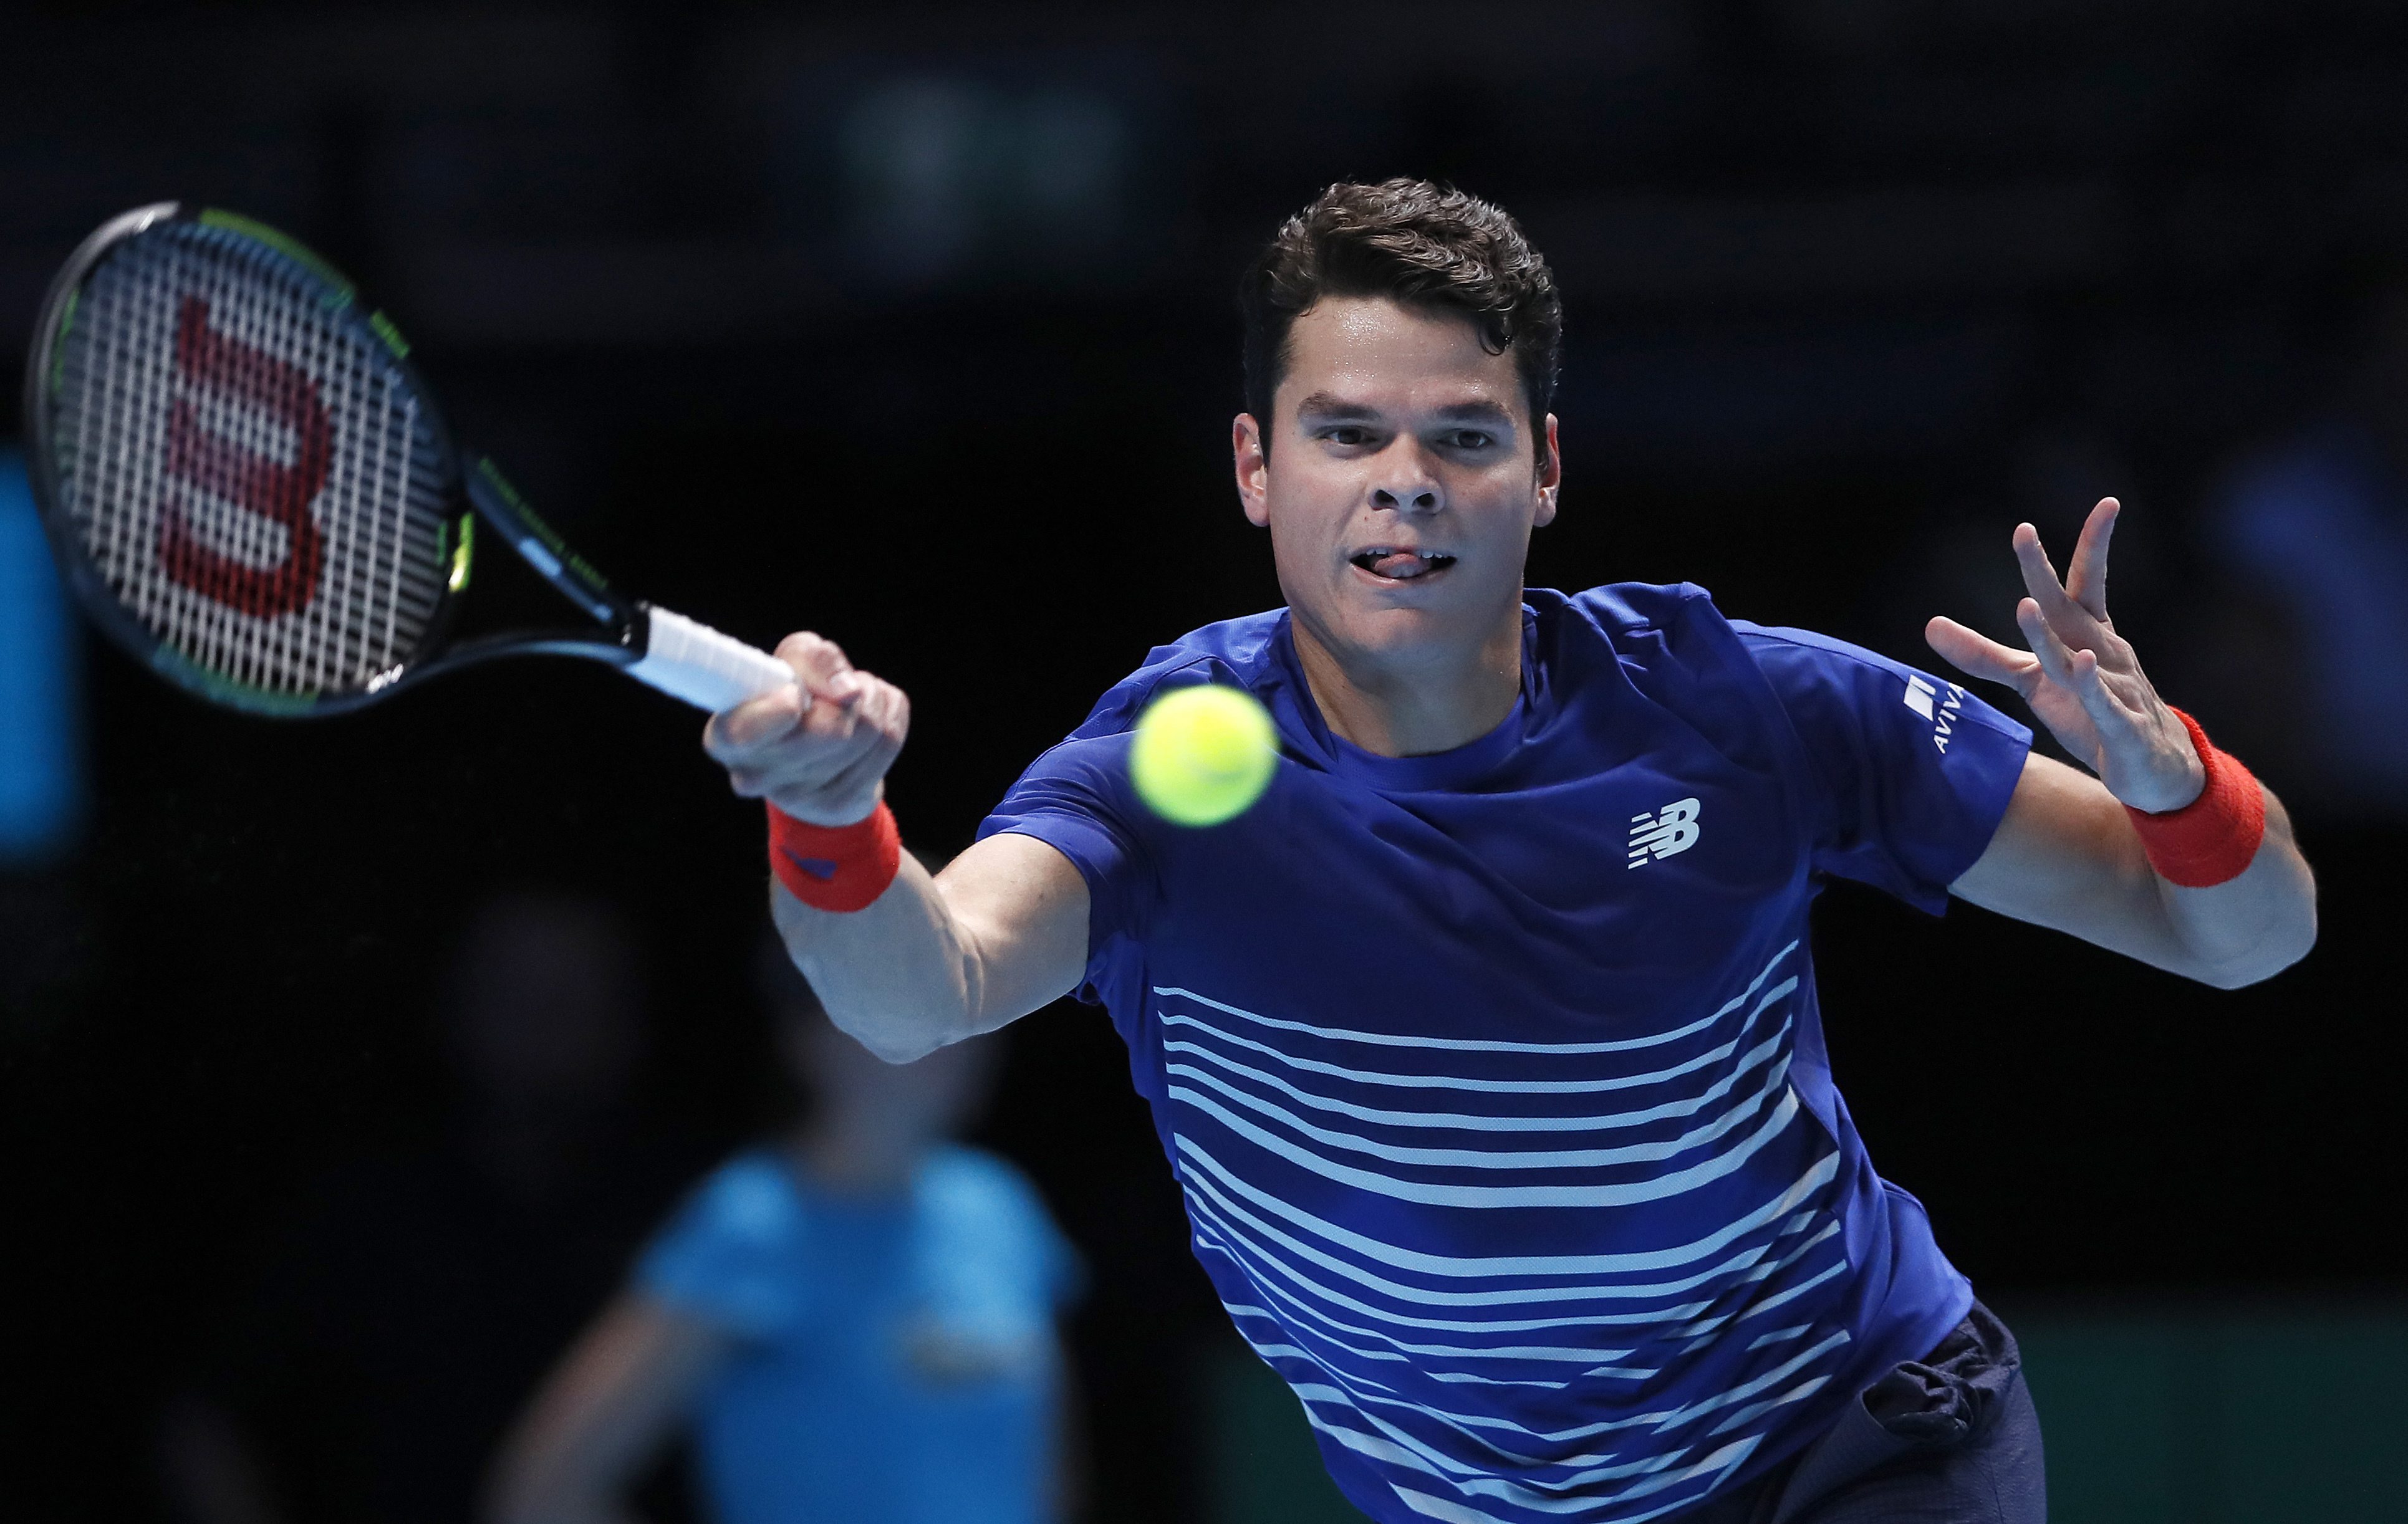 Milos Raonic of Canada plays a return to Dominic Thiem of Austria during their ATP World Tour Finals singles tennis match at the O2 Arena in London, Thursday, Nov. 17, 2016. (AP Photo/Kirsty Wigglesworth)